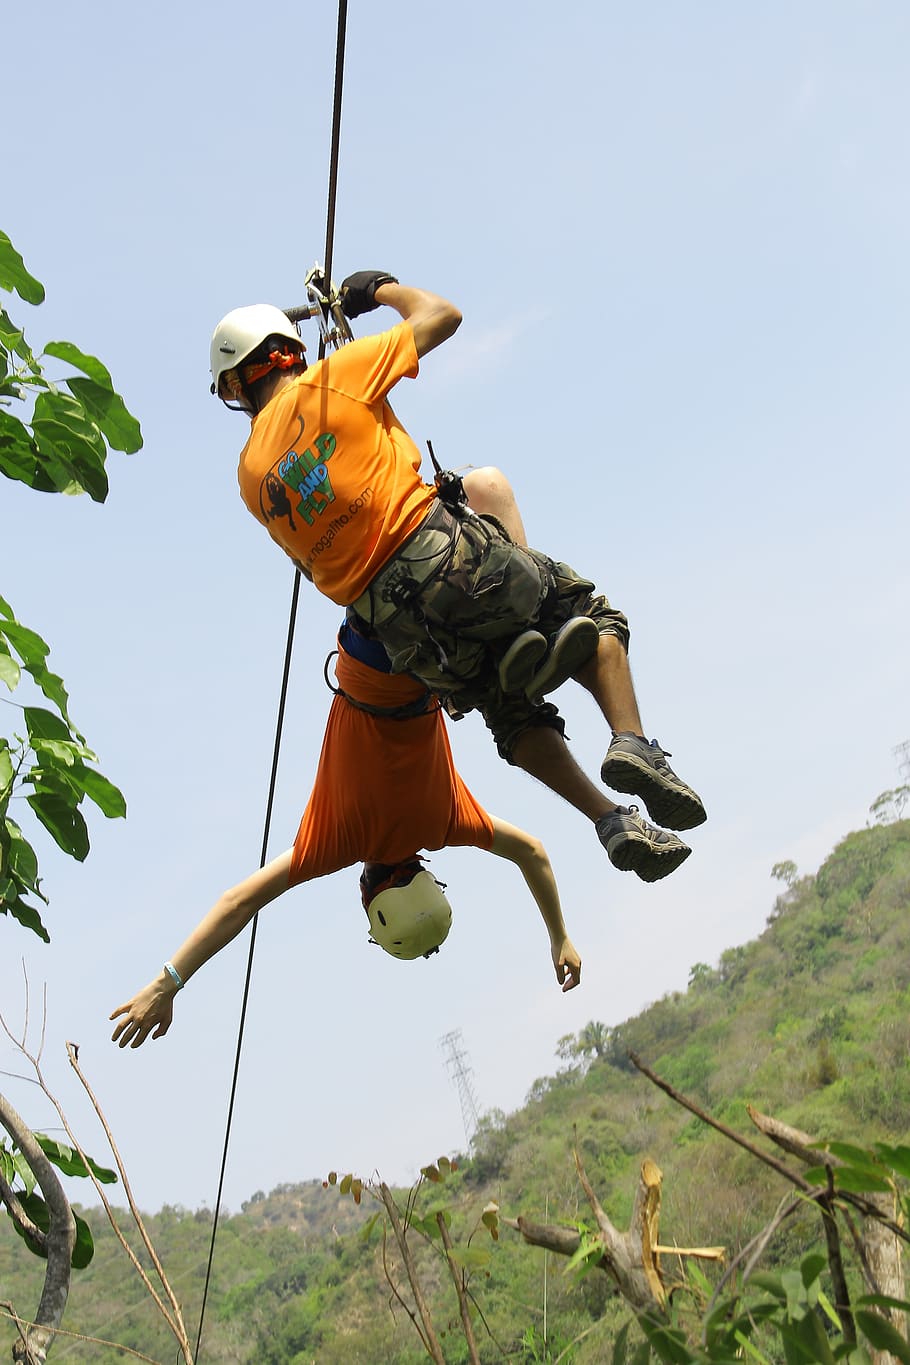 zip line, risk, adventure, mexico, vacation, outdoor, sky, extreme sports, low angle view, leisure activity